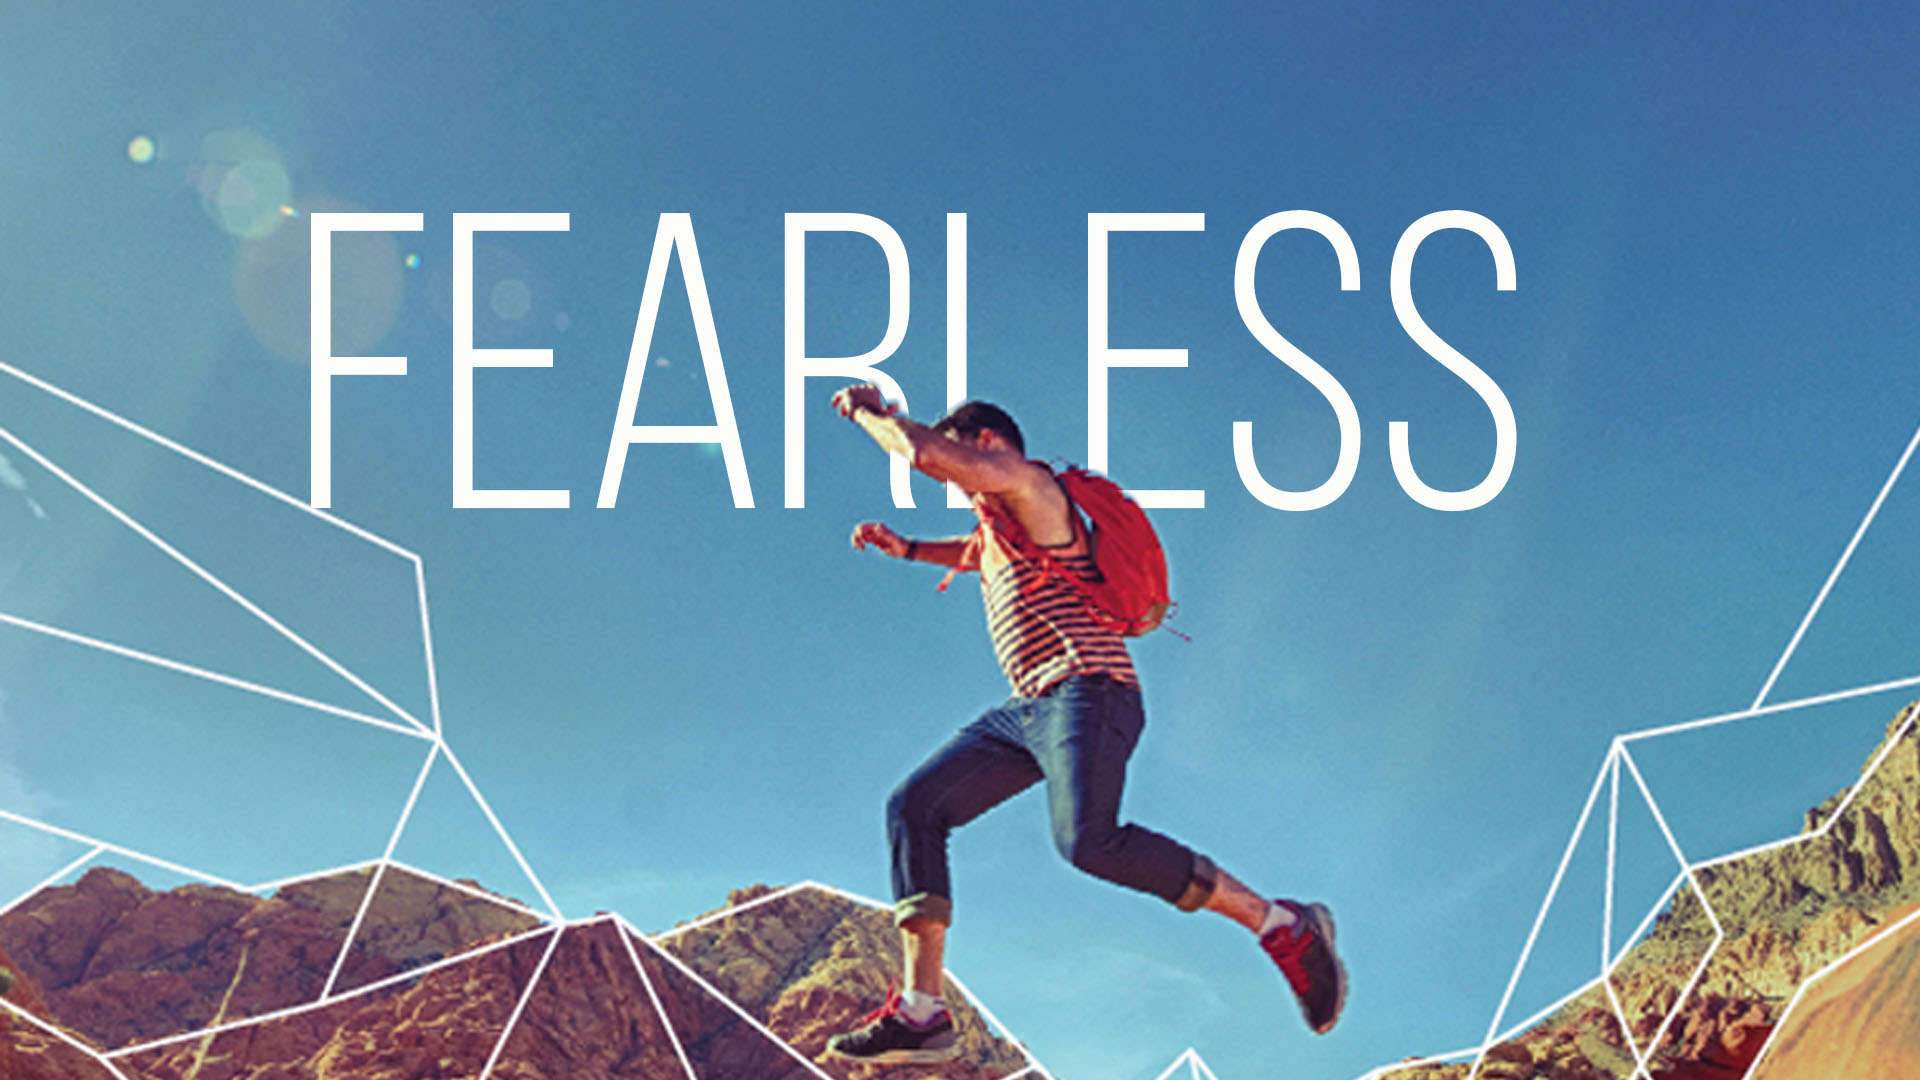 Fearless (For Teens)

8-Week Program 
Next session to be determined
